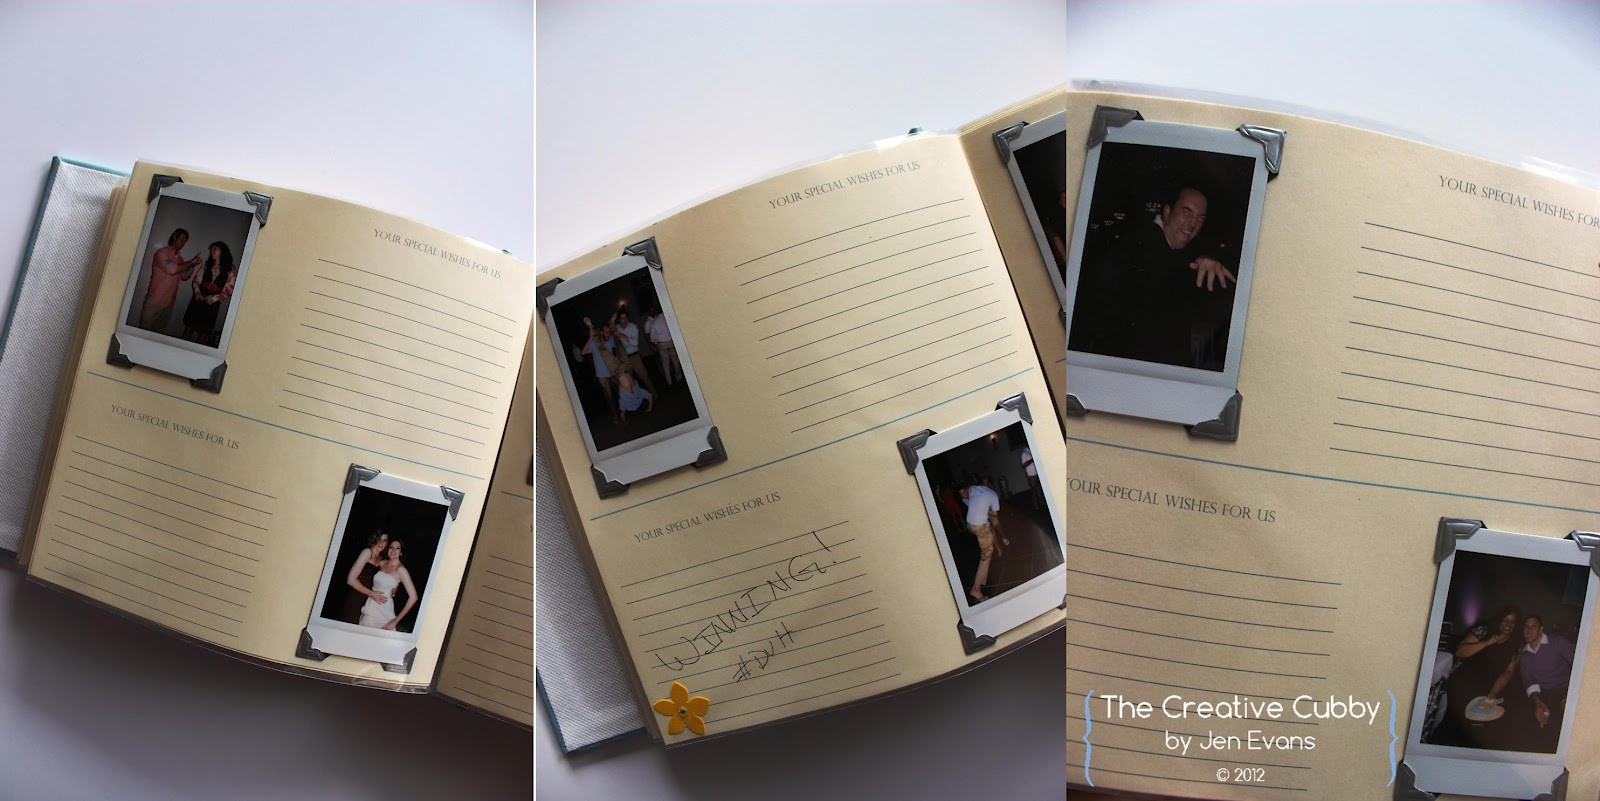 Polaroid Picture Wedding Guest Book
 The Creative Cubby Polaroid Wedding Guest Book